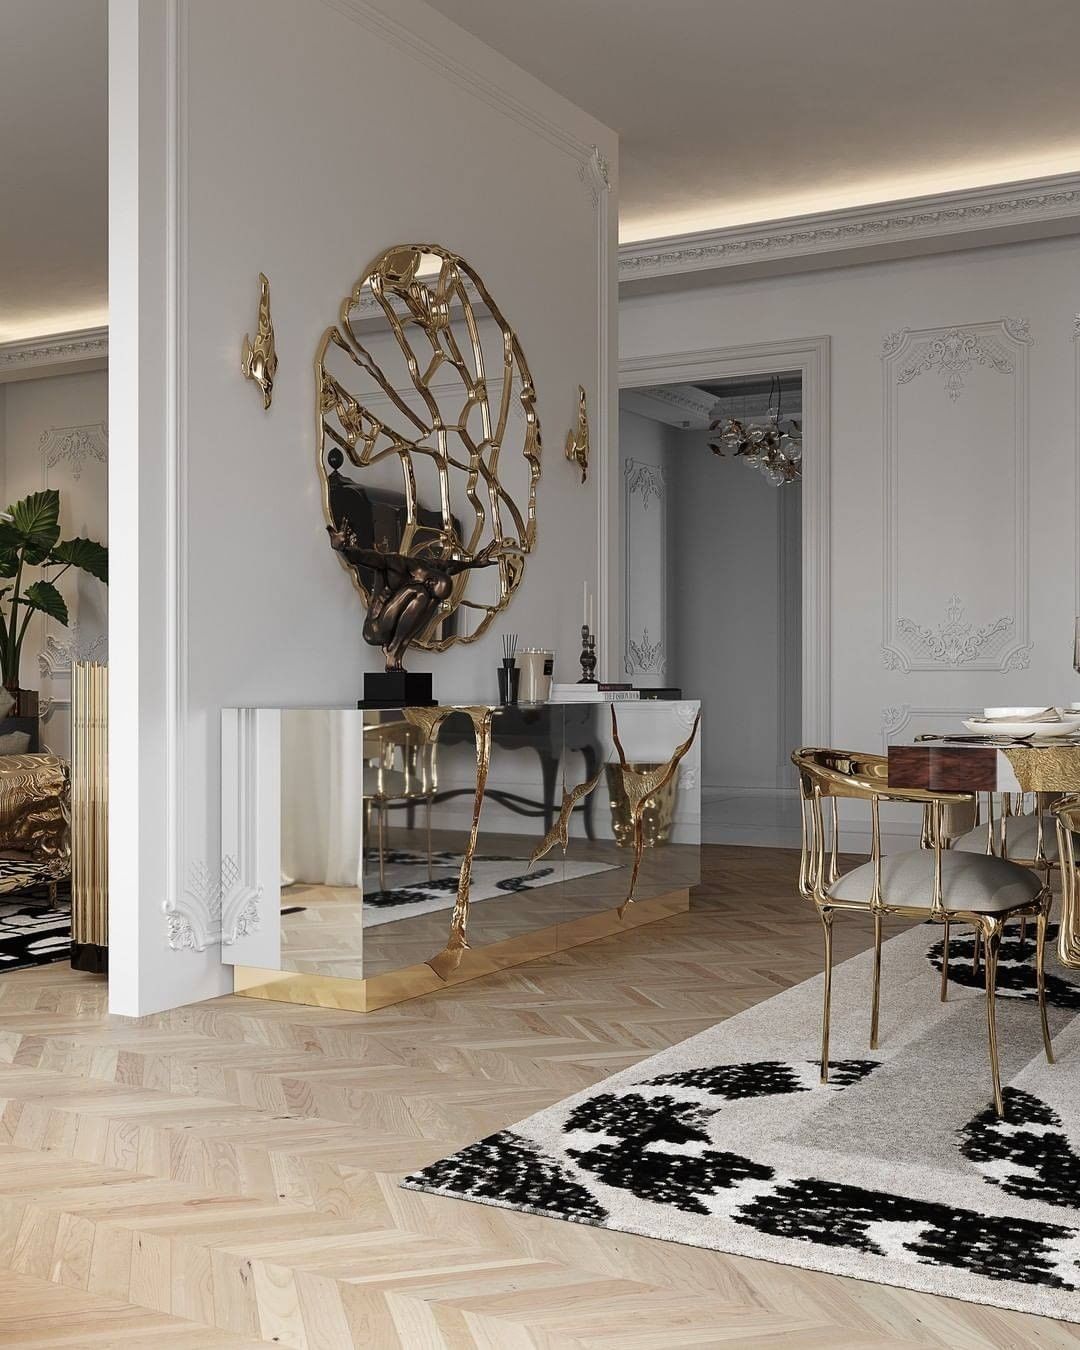 Dining Room In A White And Gold Ambiance With Our Majestic Imperial Snake Rug by Rug'Society